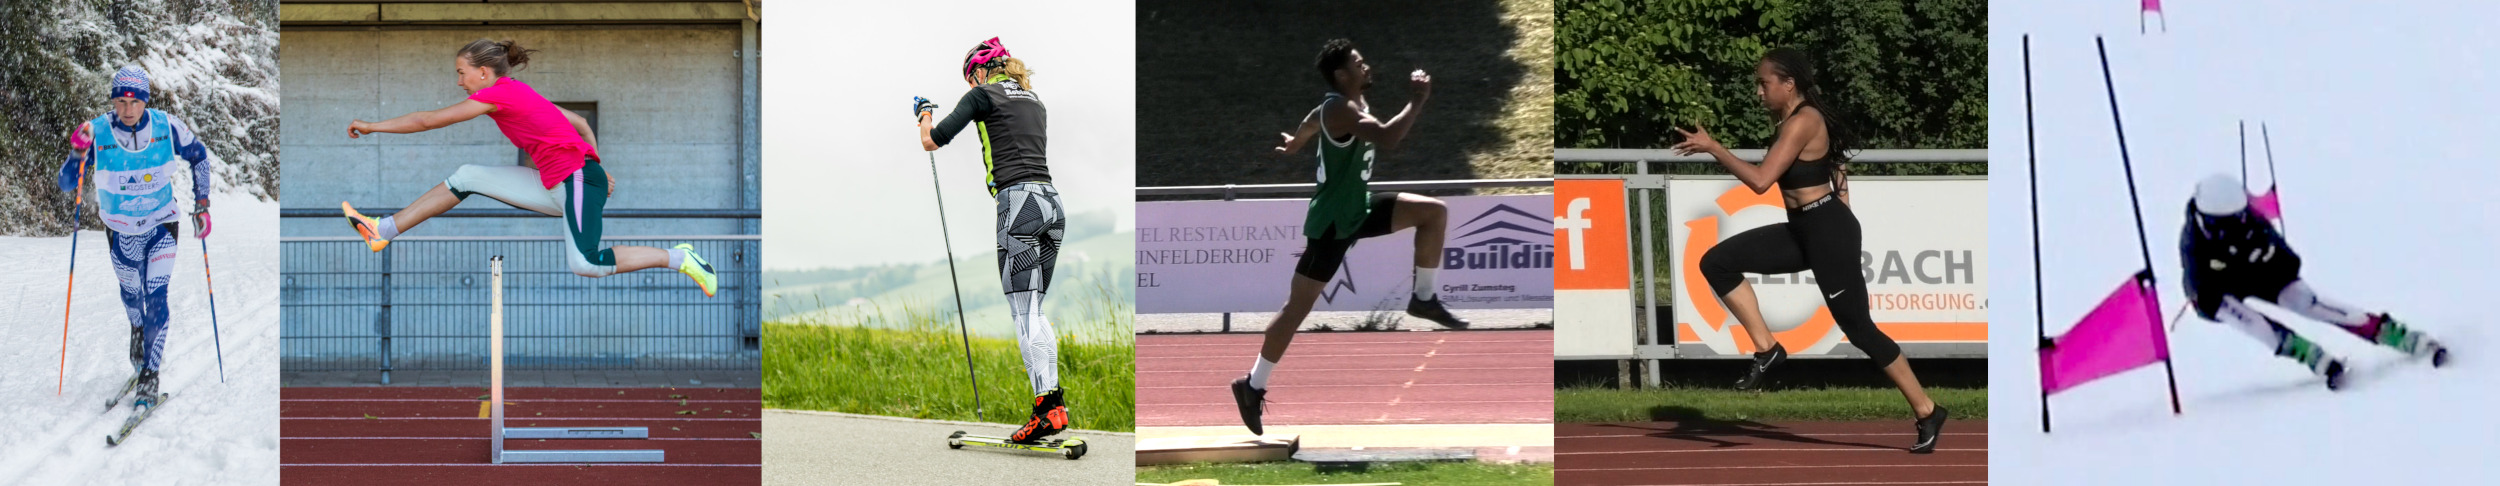 Collage of athletes in sports that our system supports: cross-country skiing, alpine ski racing, biathlon, track and field, sprint running, hurdles